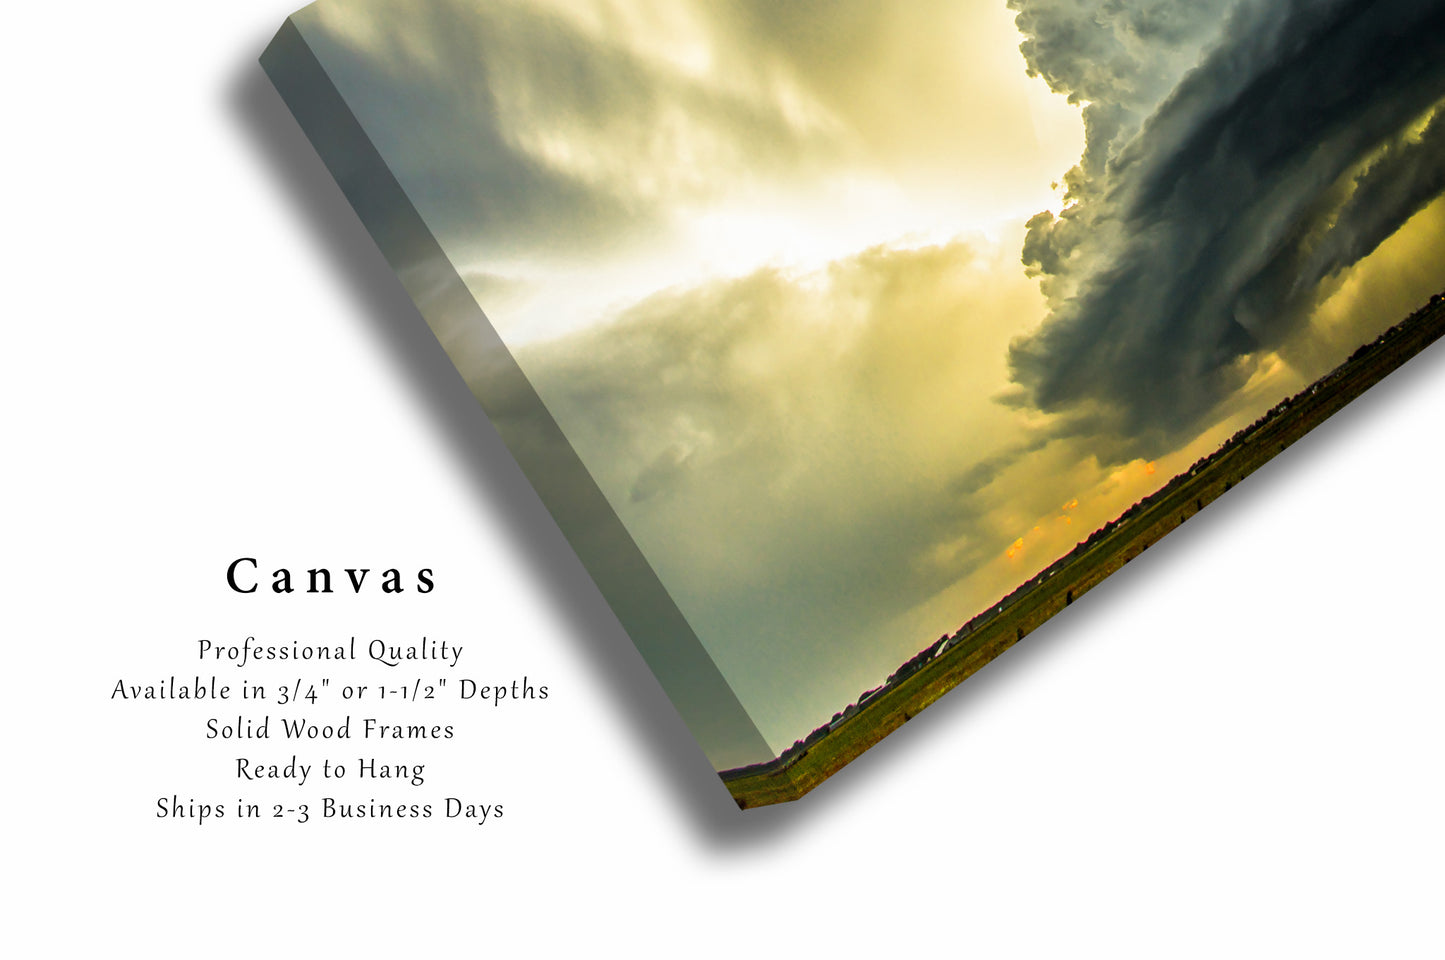 Storm Canvas | Supercell Thunderstorm Gallery Wrap | Extreme Weather Photography | Oklahoma Wall Art | Nature Decor | Ready to Hang